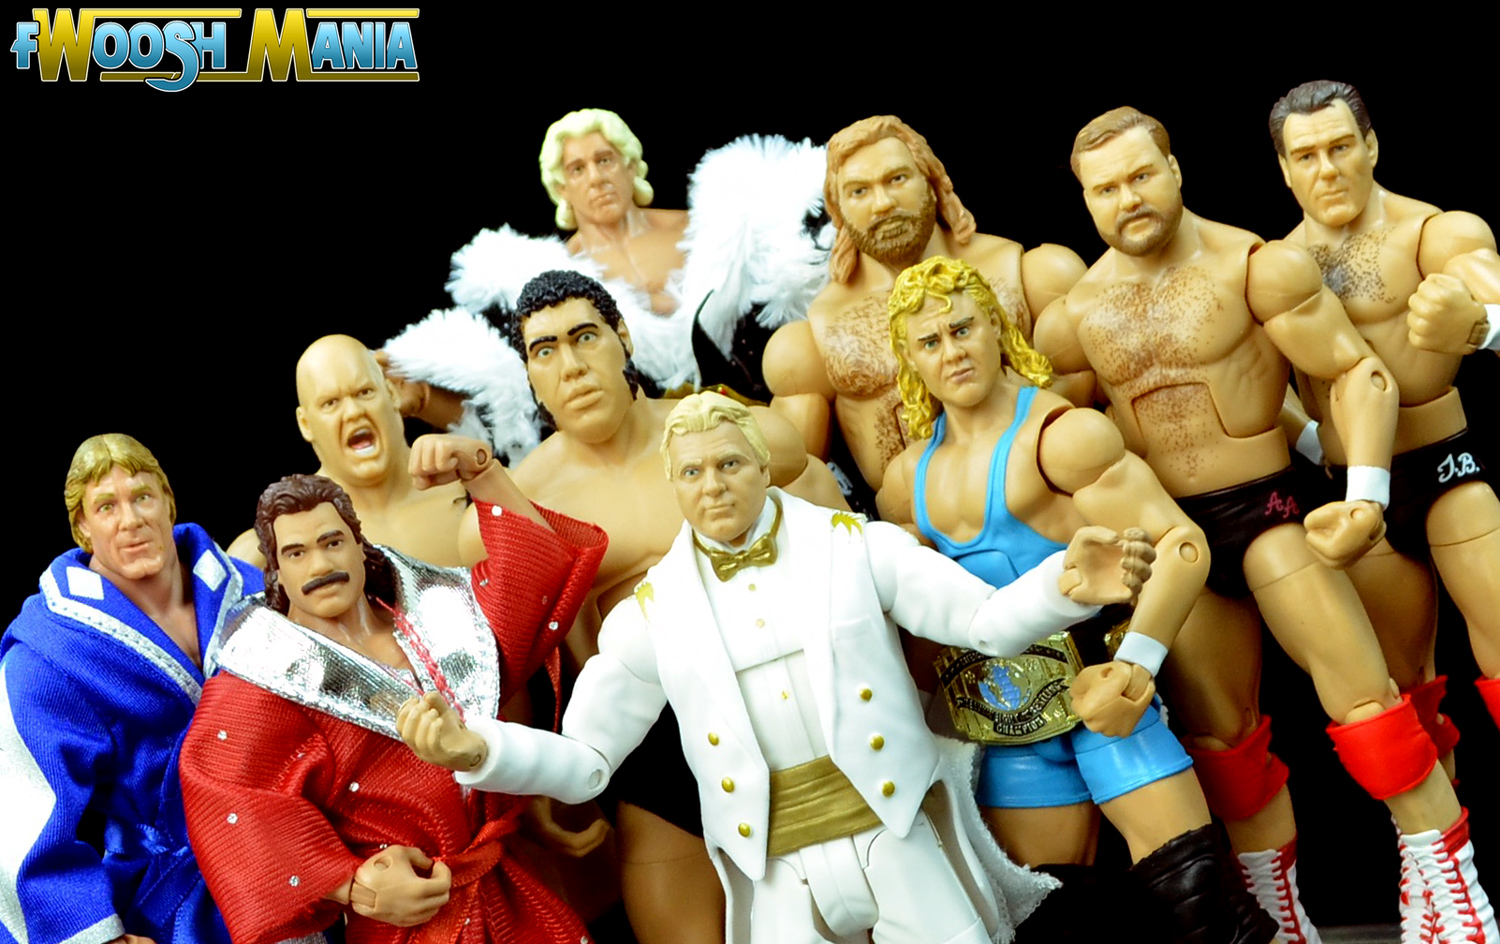 Bobby Mr Perfect WWE Hall of Fame Exclusive 4-Pack Set / Heenan Family / Andre The Giant Big John Studd by Mattel